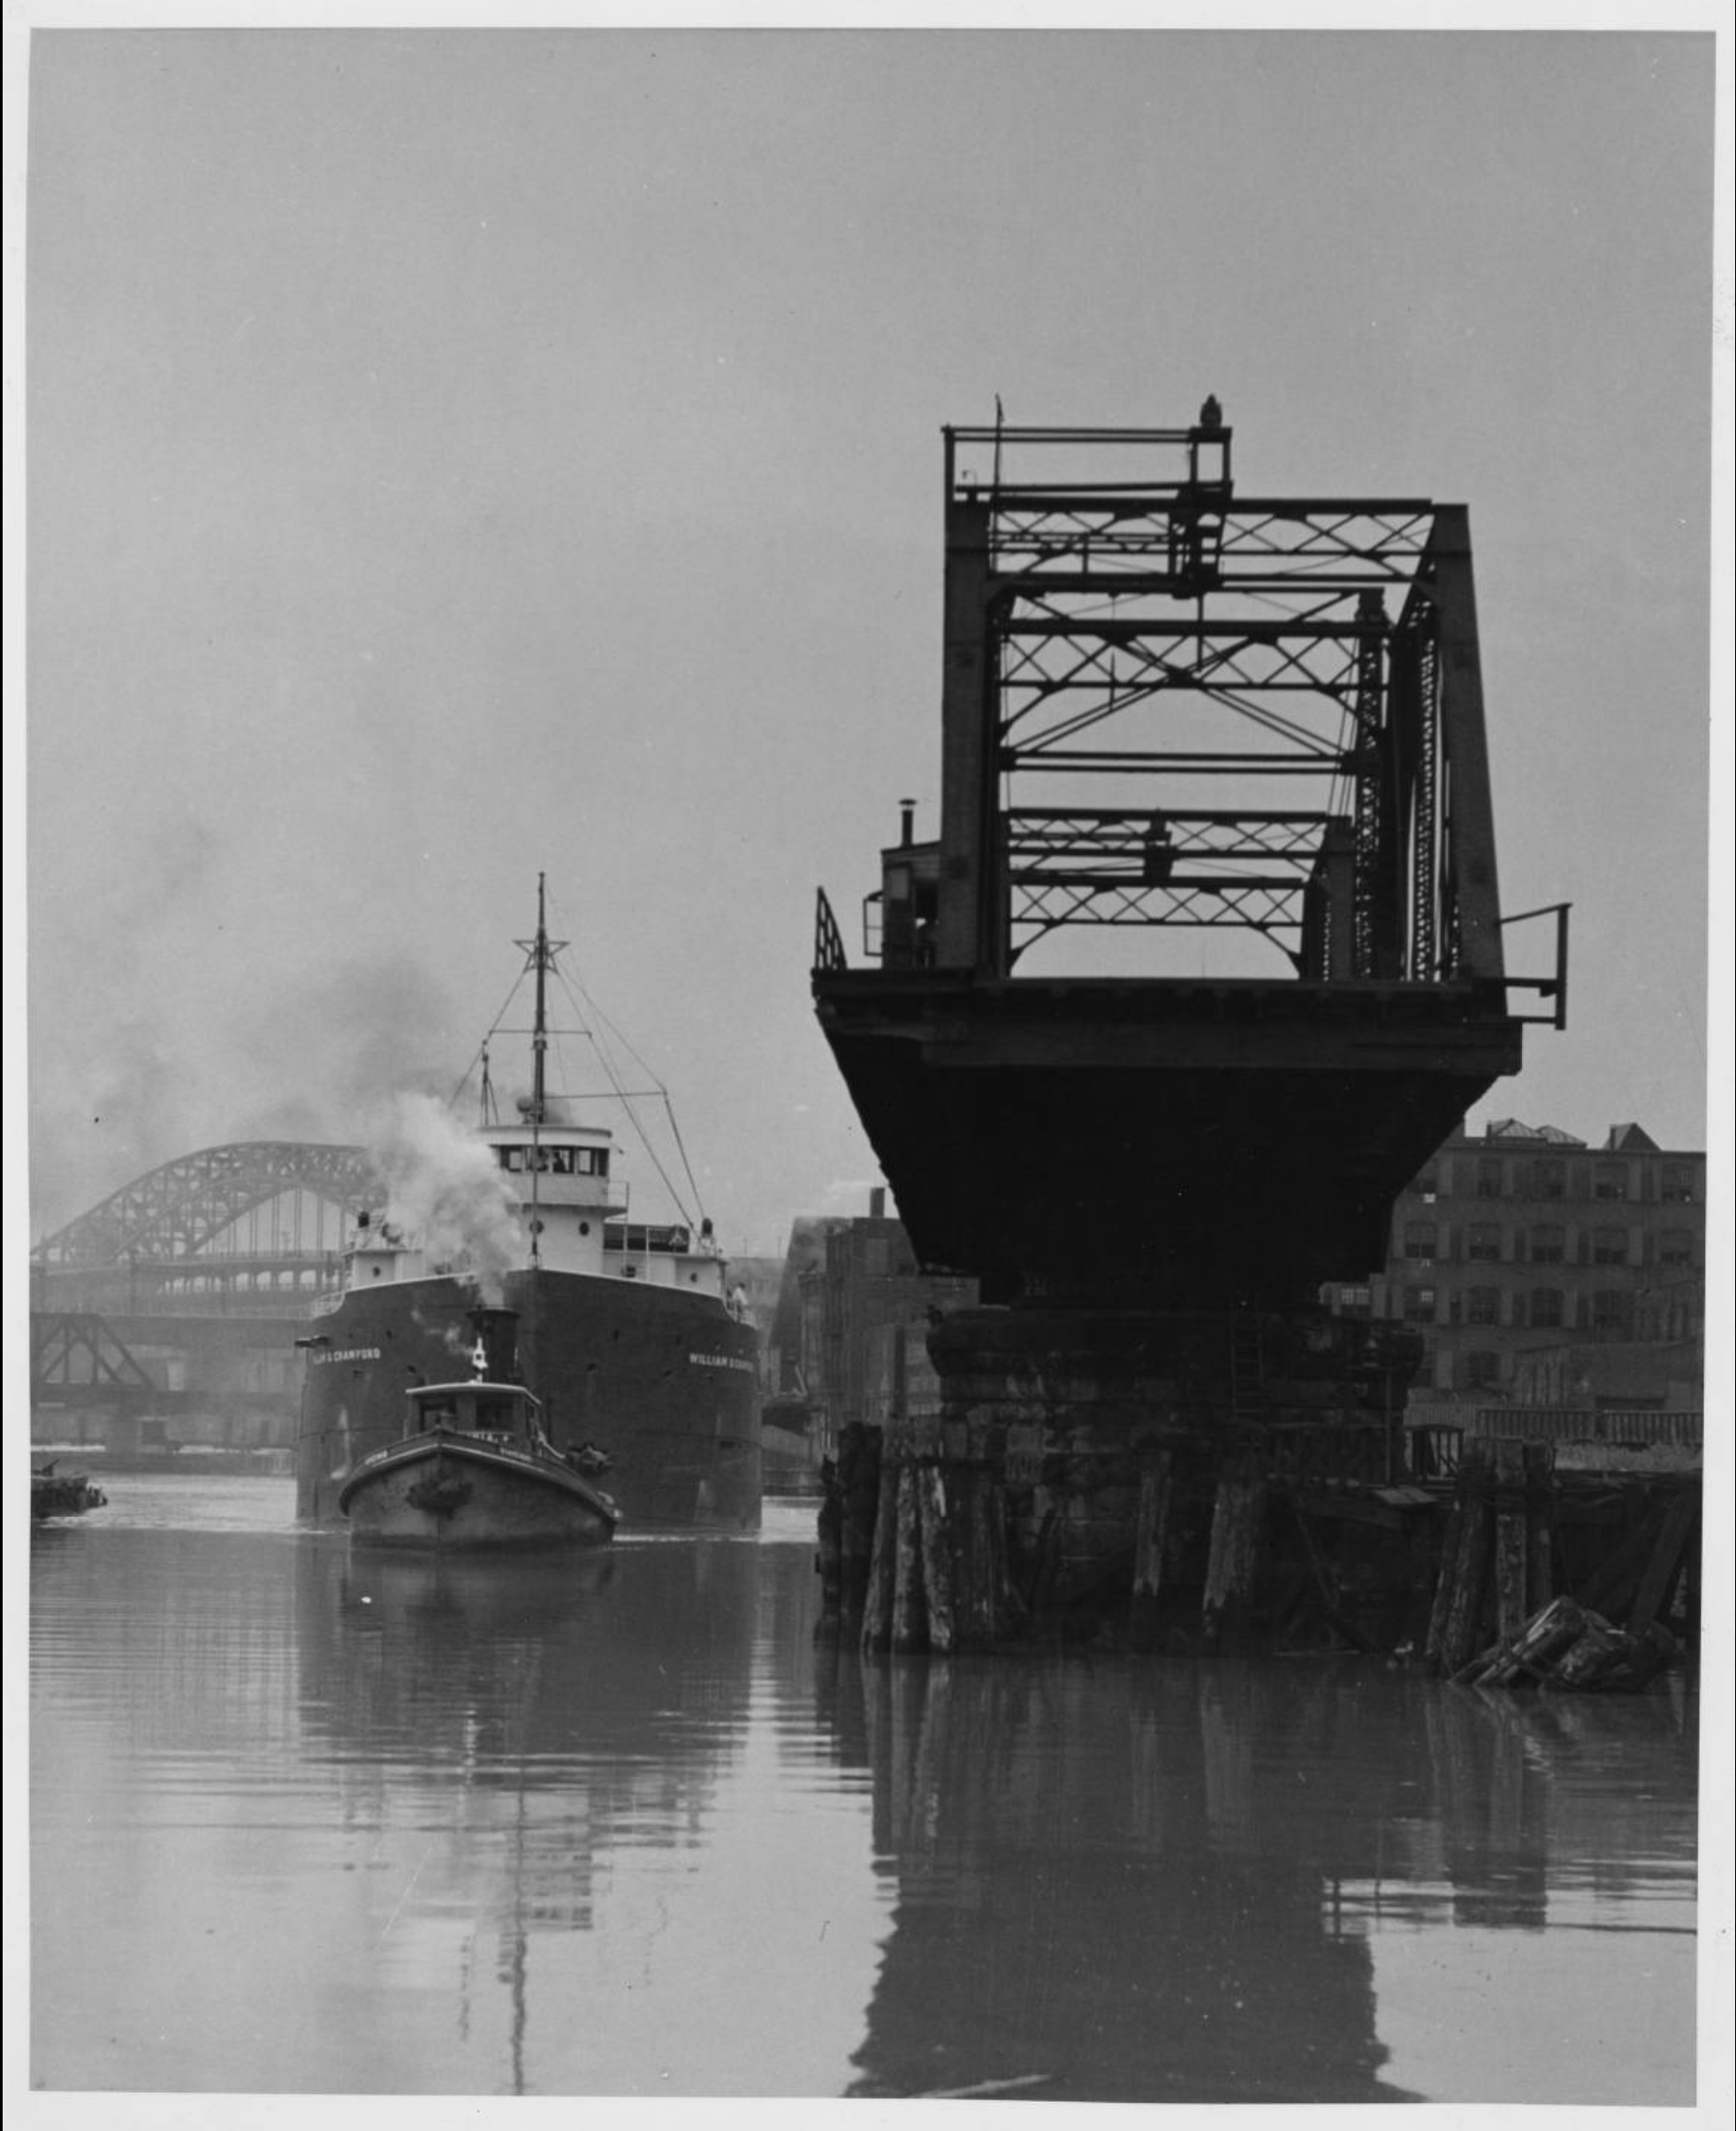 Black and white photograph of a swing bridge in the open position.